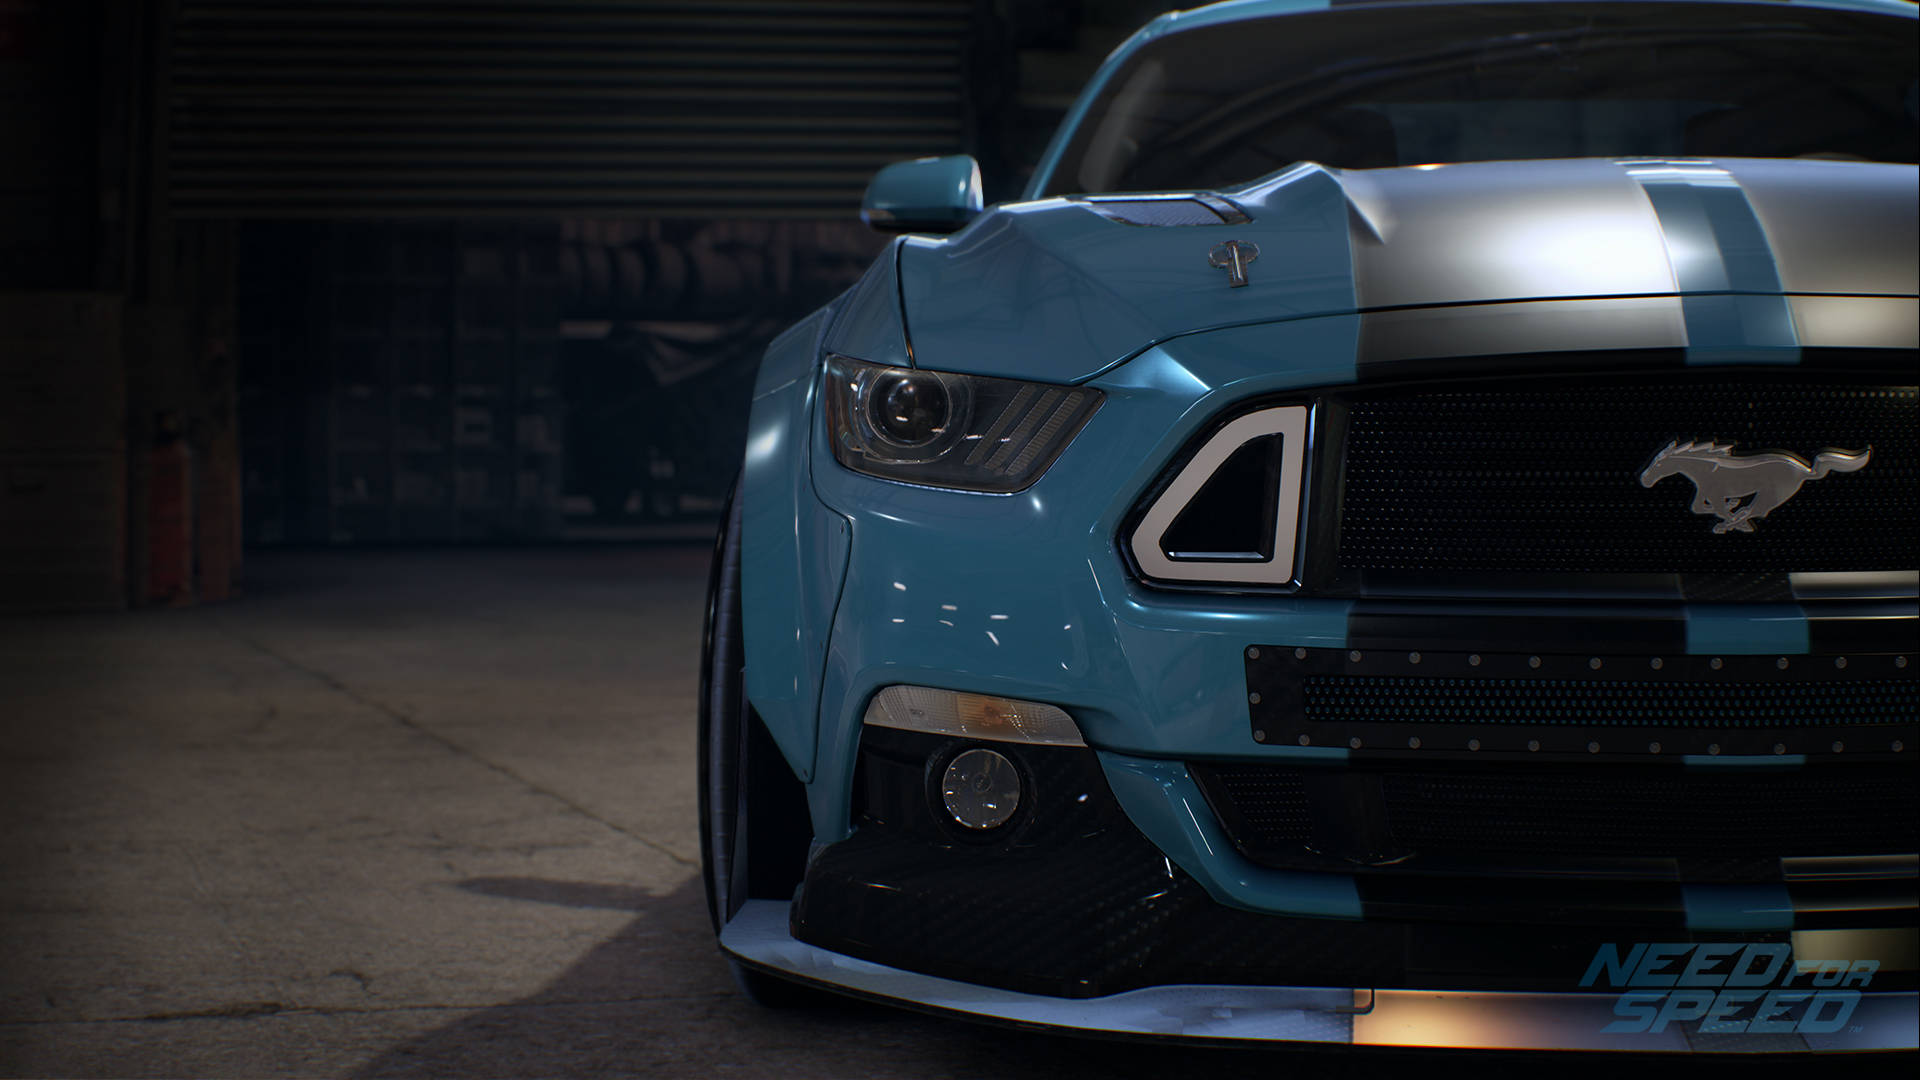 Need For Speed Blue Ford Mustang Gt Background